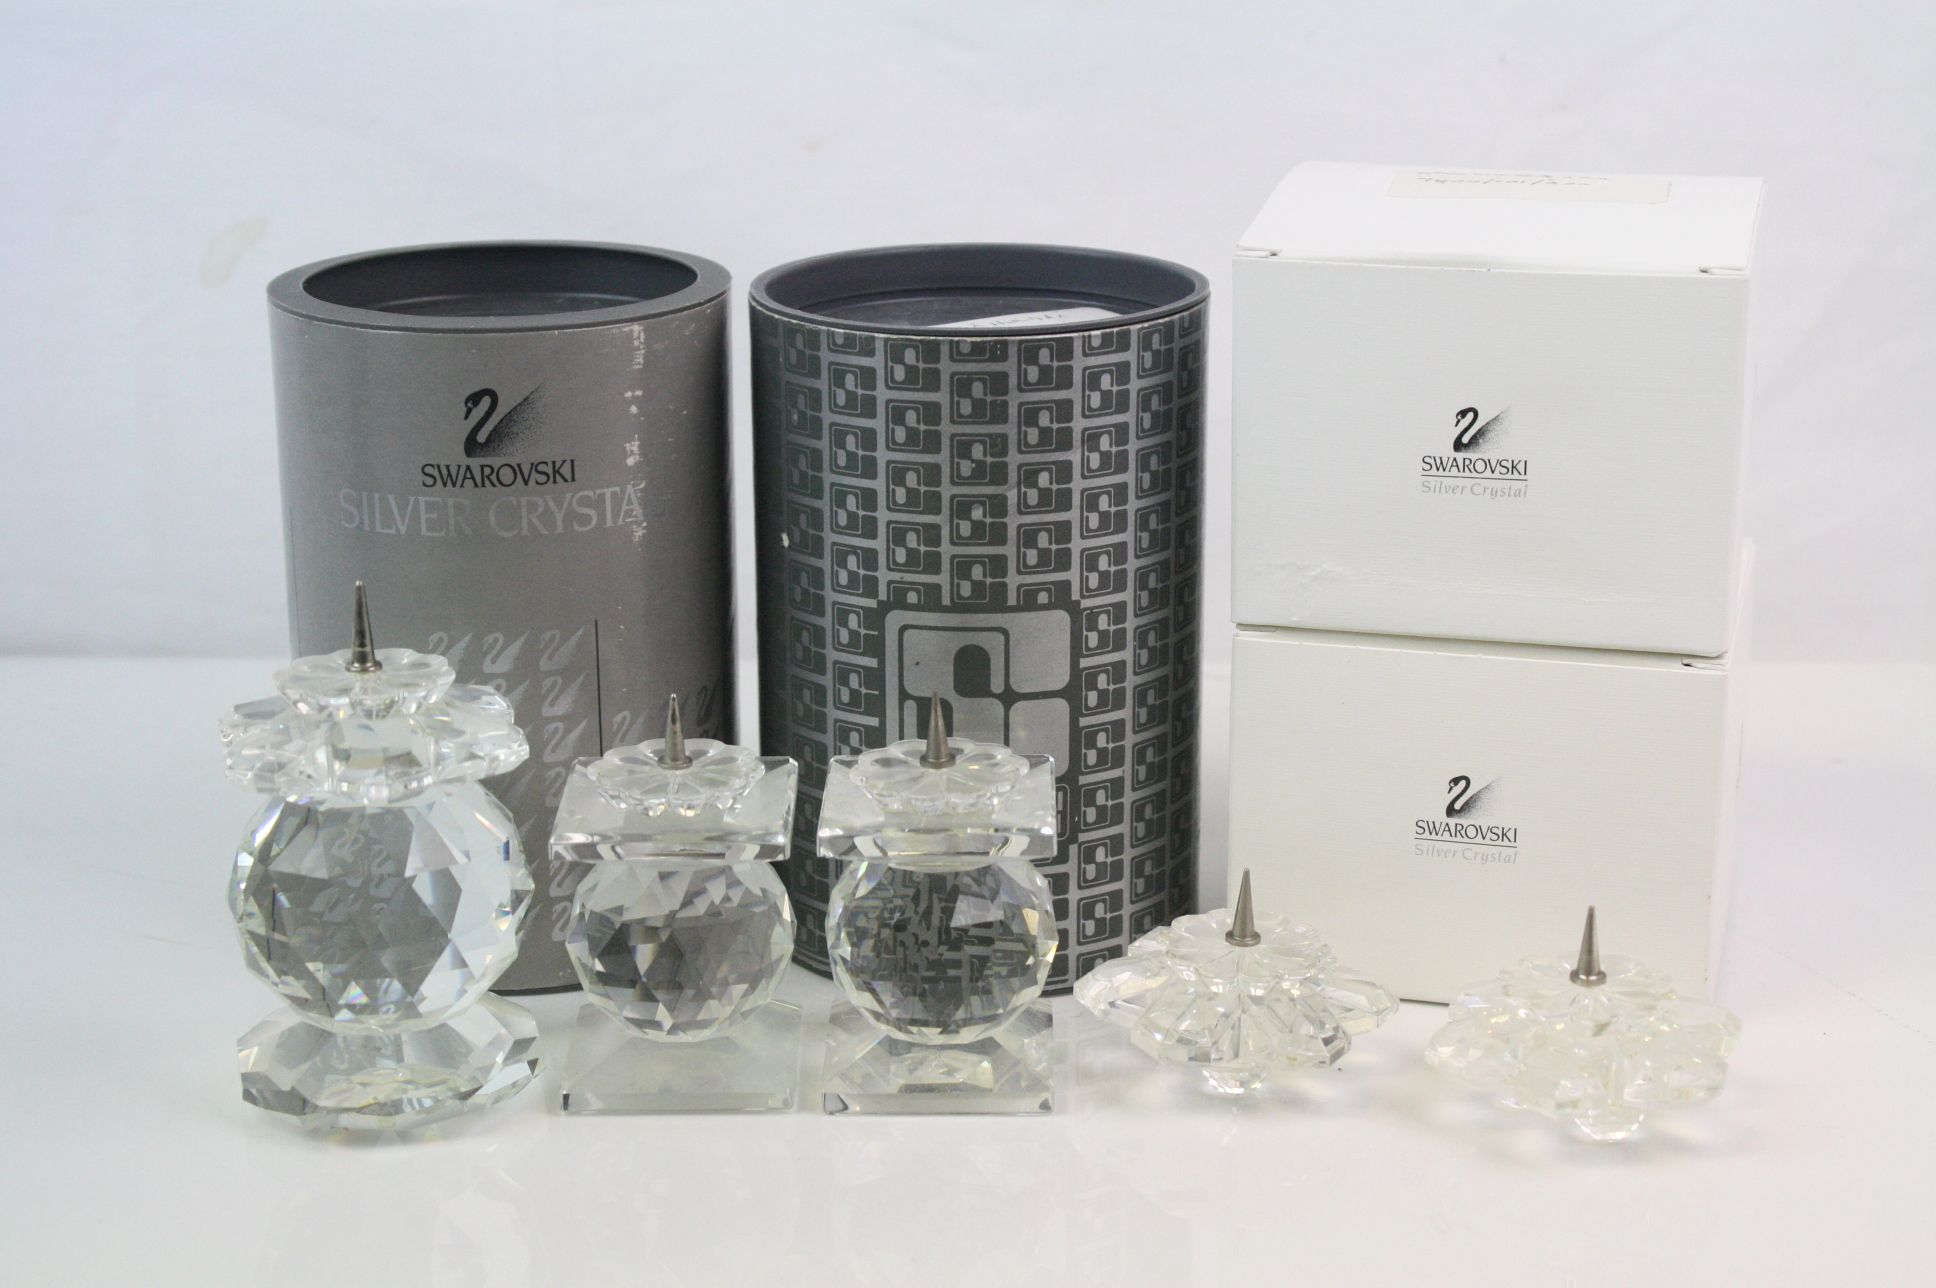 Collection of Swarovski crystal candle holders 7600/101/102/103 (not in original boxes)